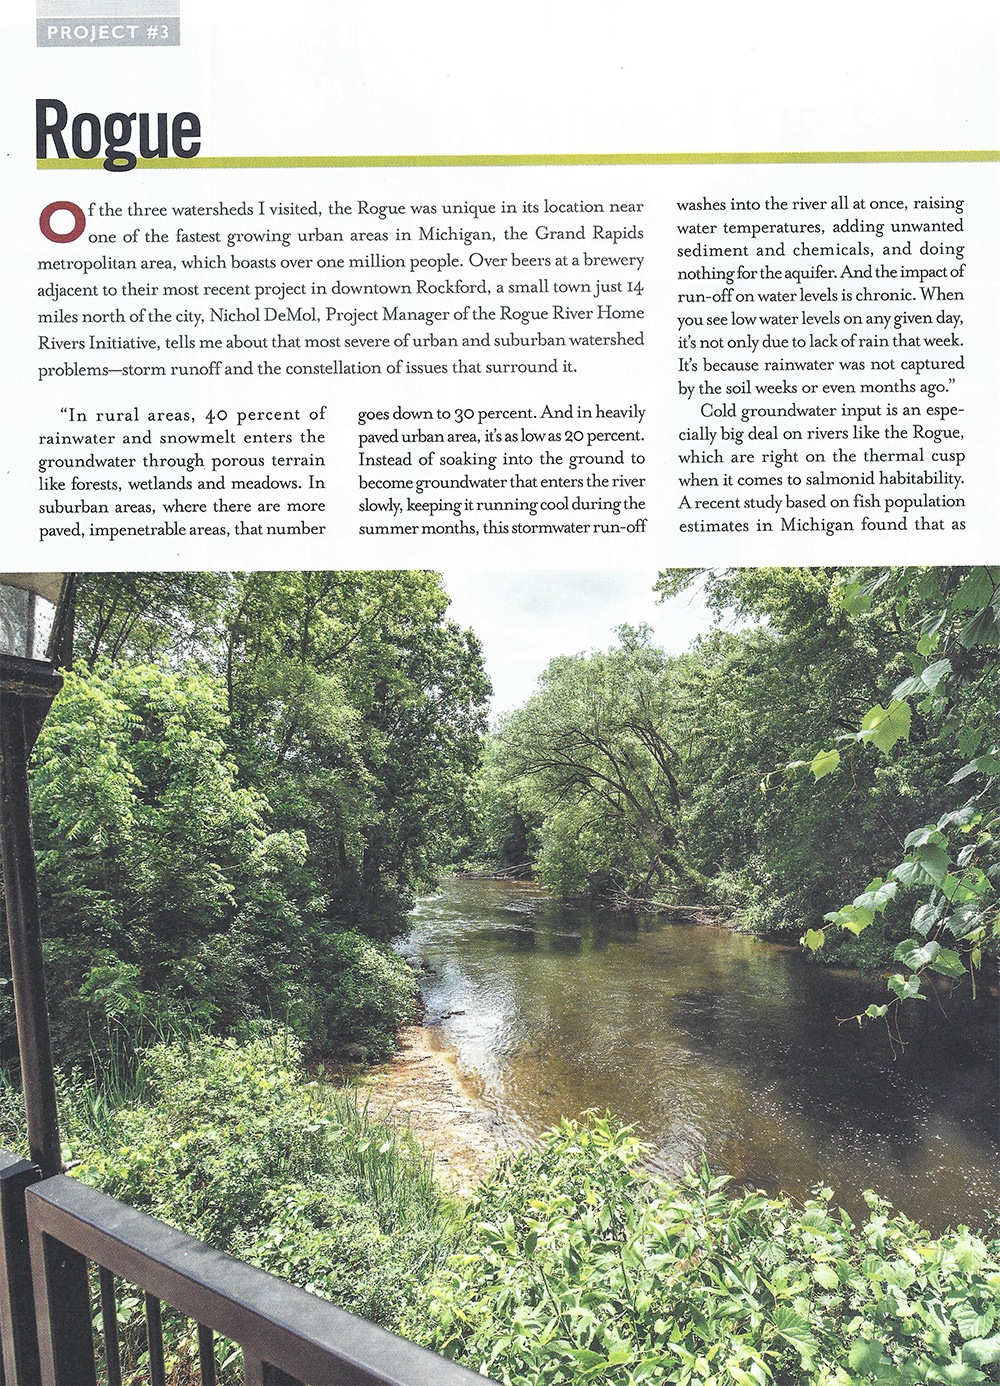 Rogue River Home Rivers Initiative - Trout Magazine - Page 1